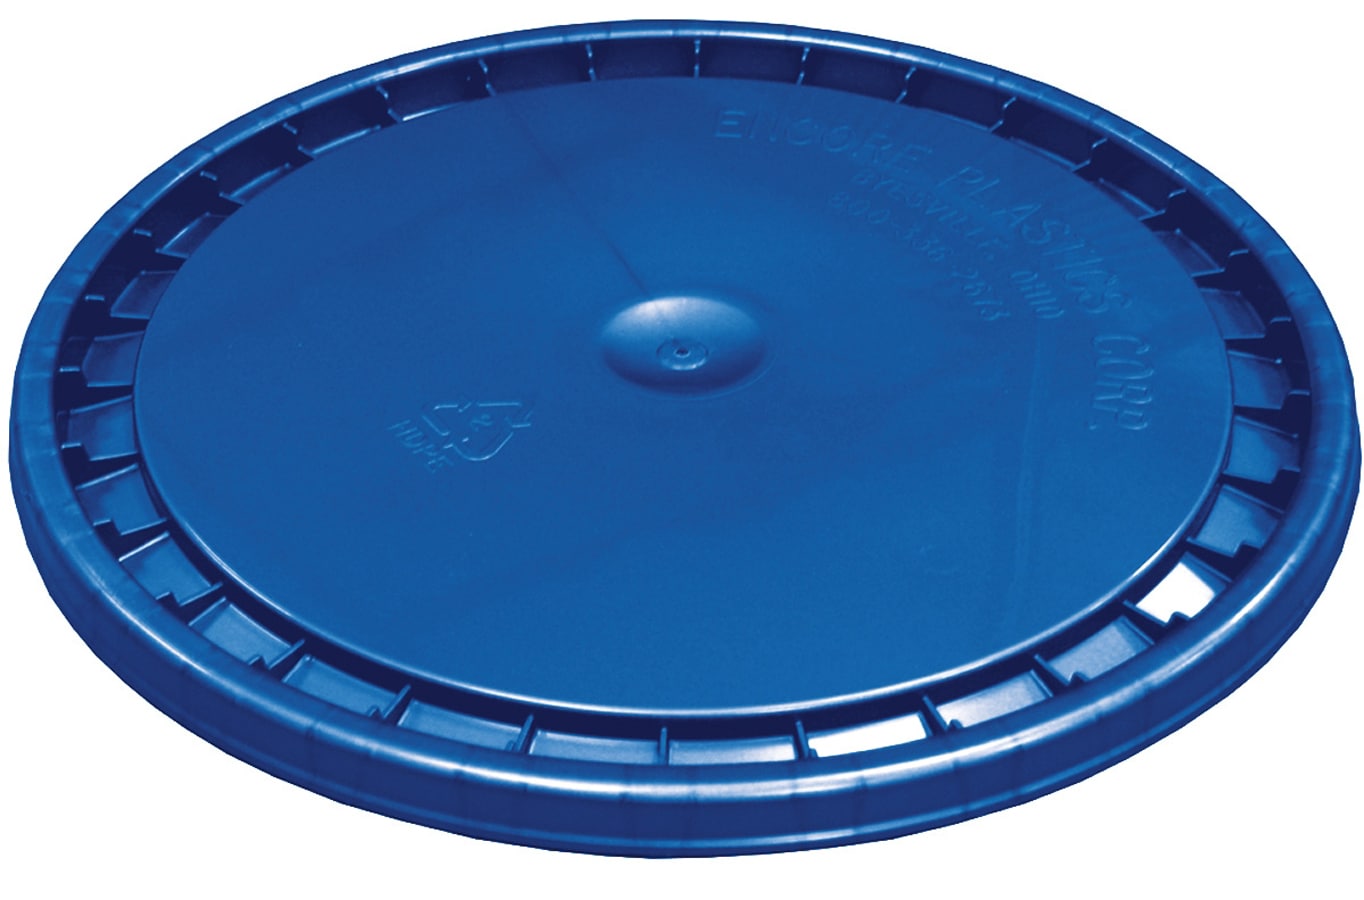 United Solutions 5-Gallon Blue Plastic Bucket Lid in the Bucket